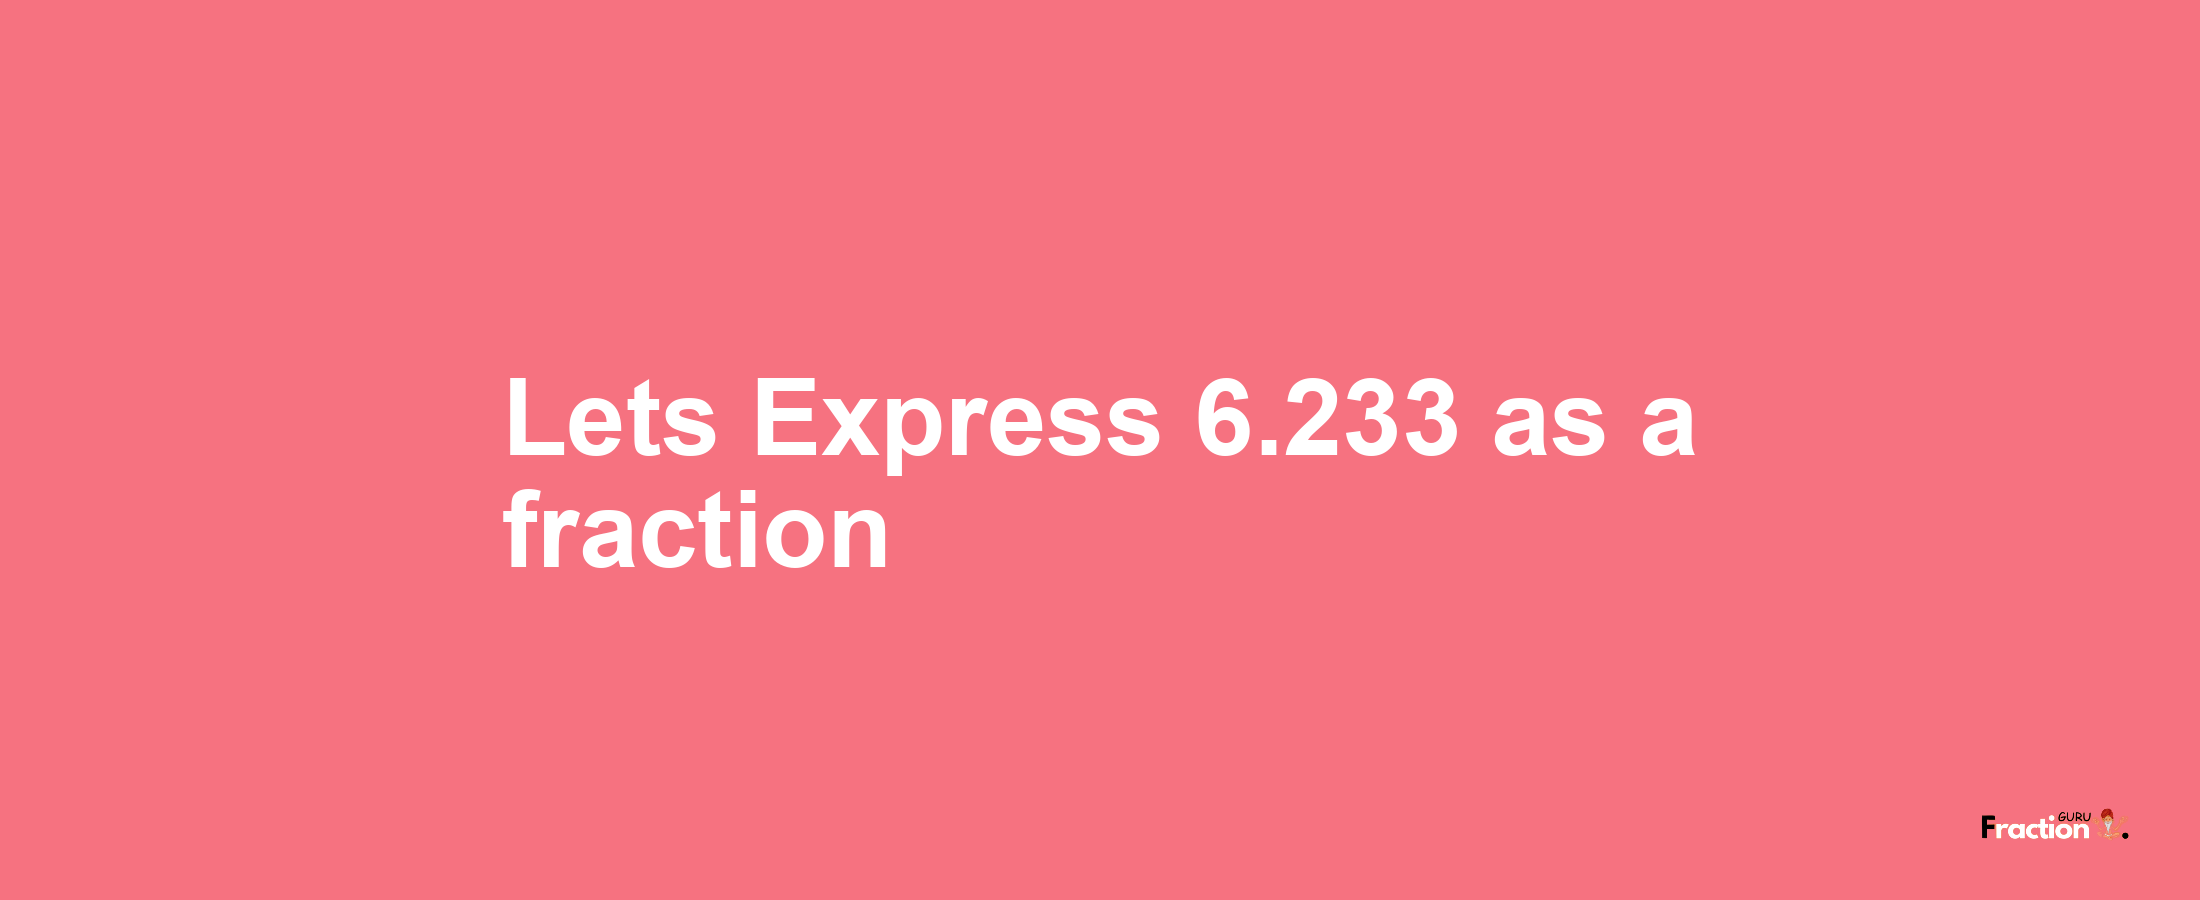 Lets Express 6.233 as afraction